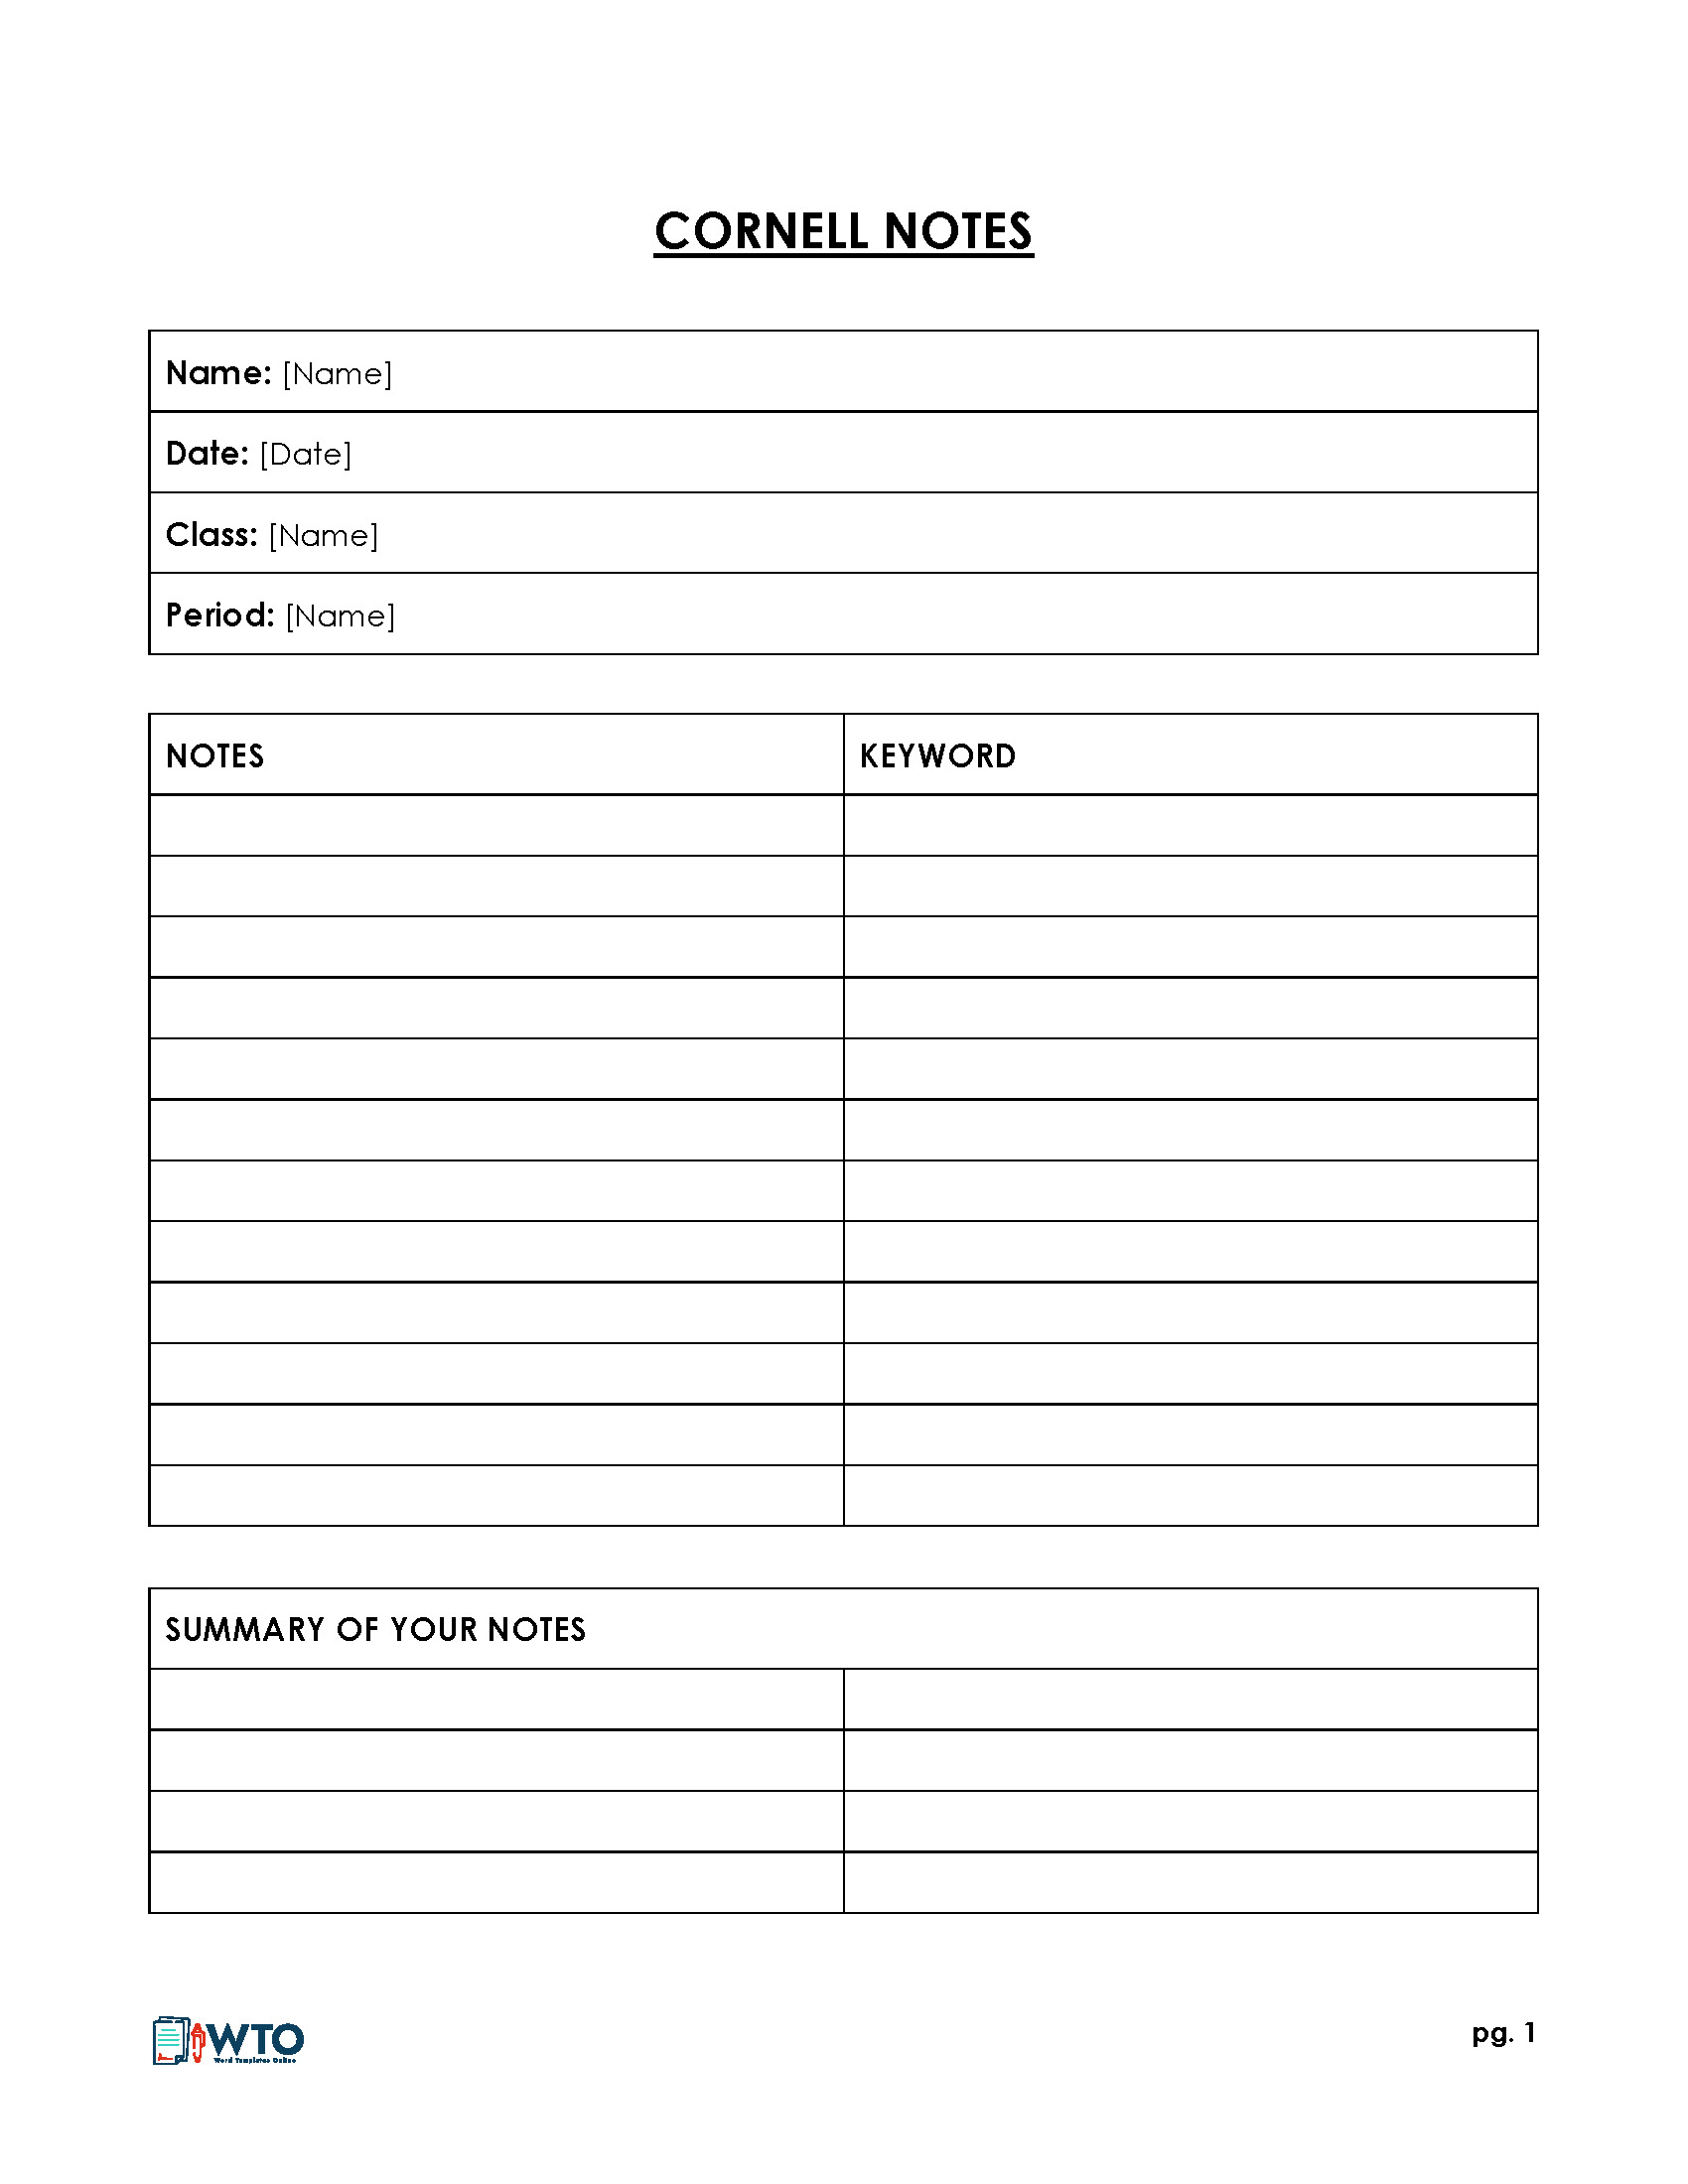 64 Free Cornell Note Templates (Cornell Note Taking Explained)